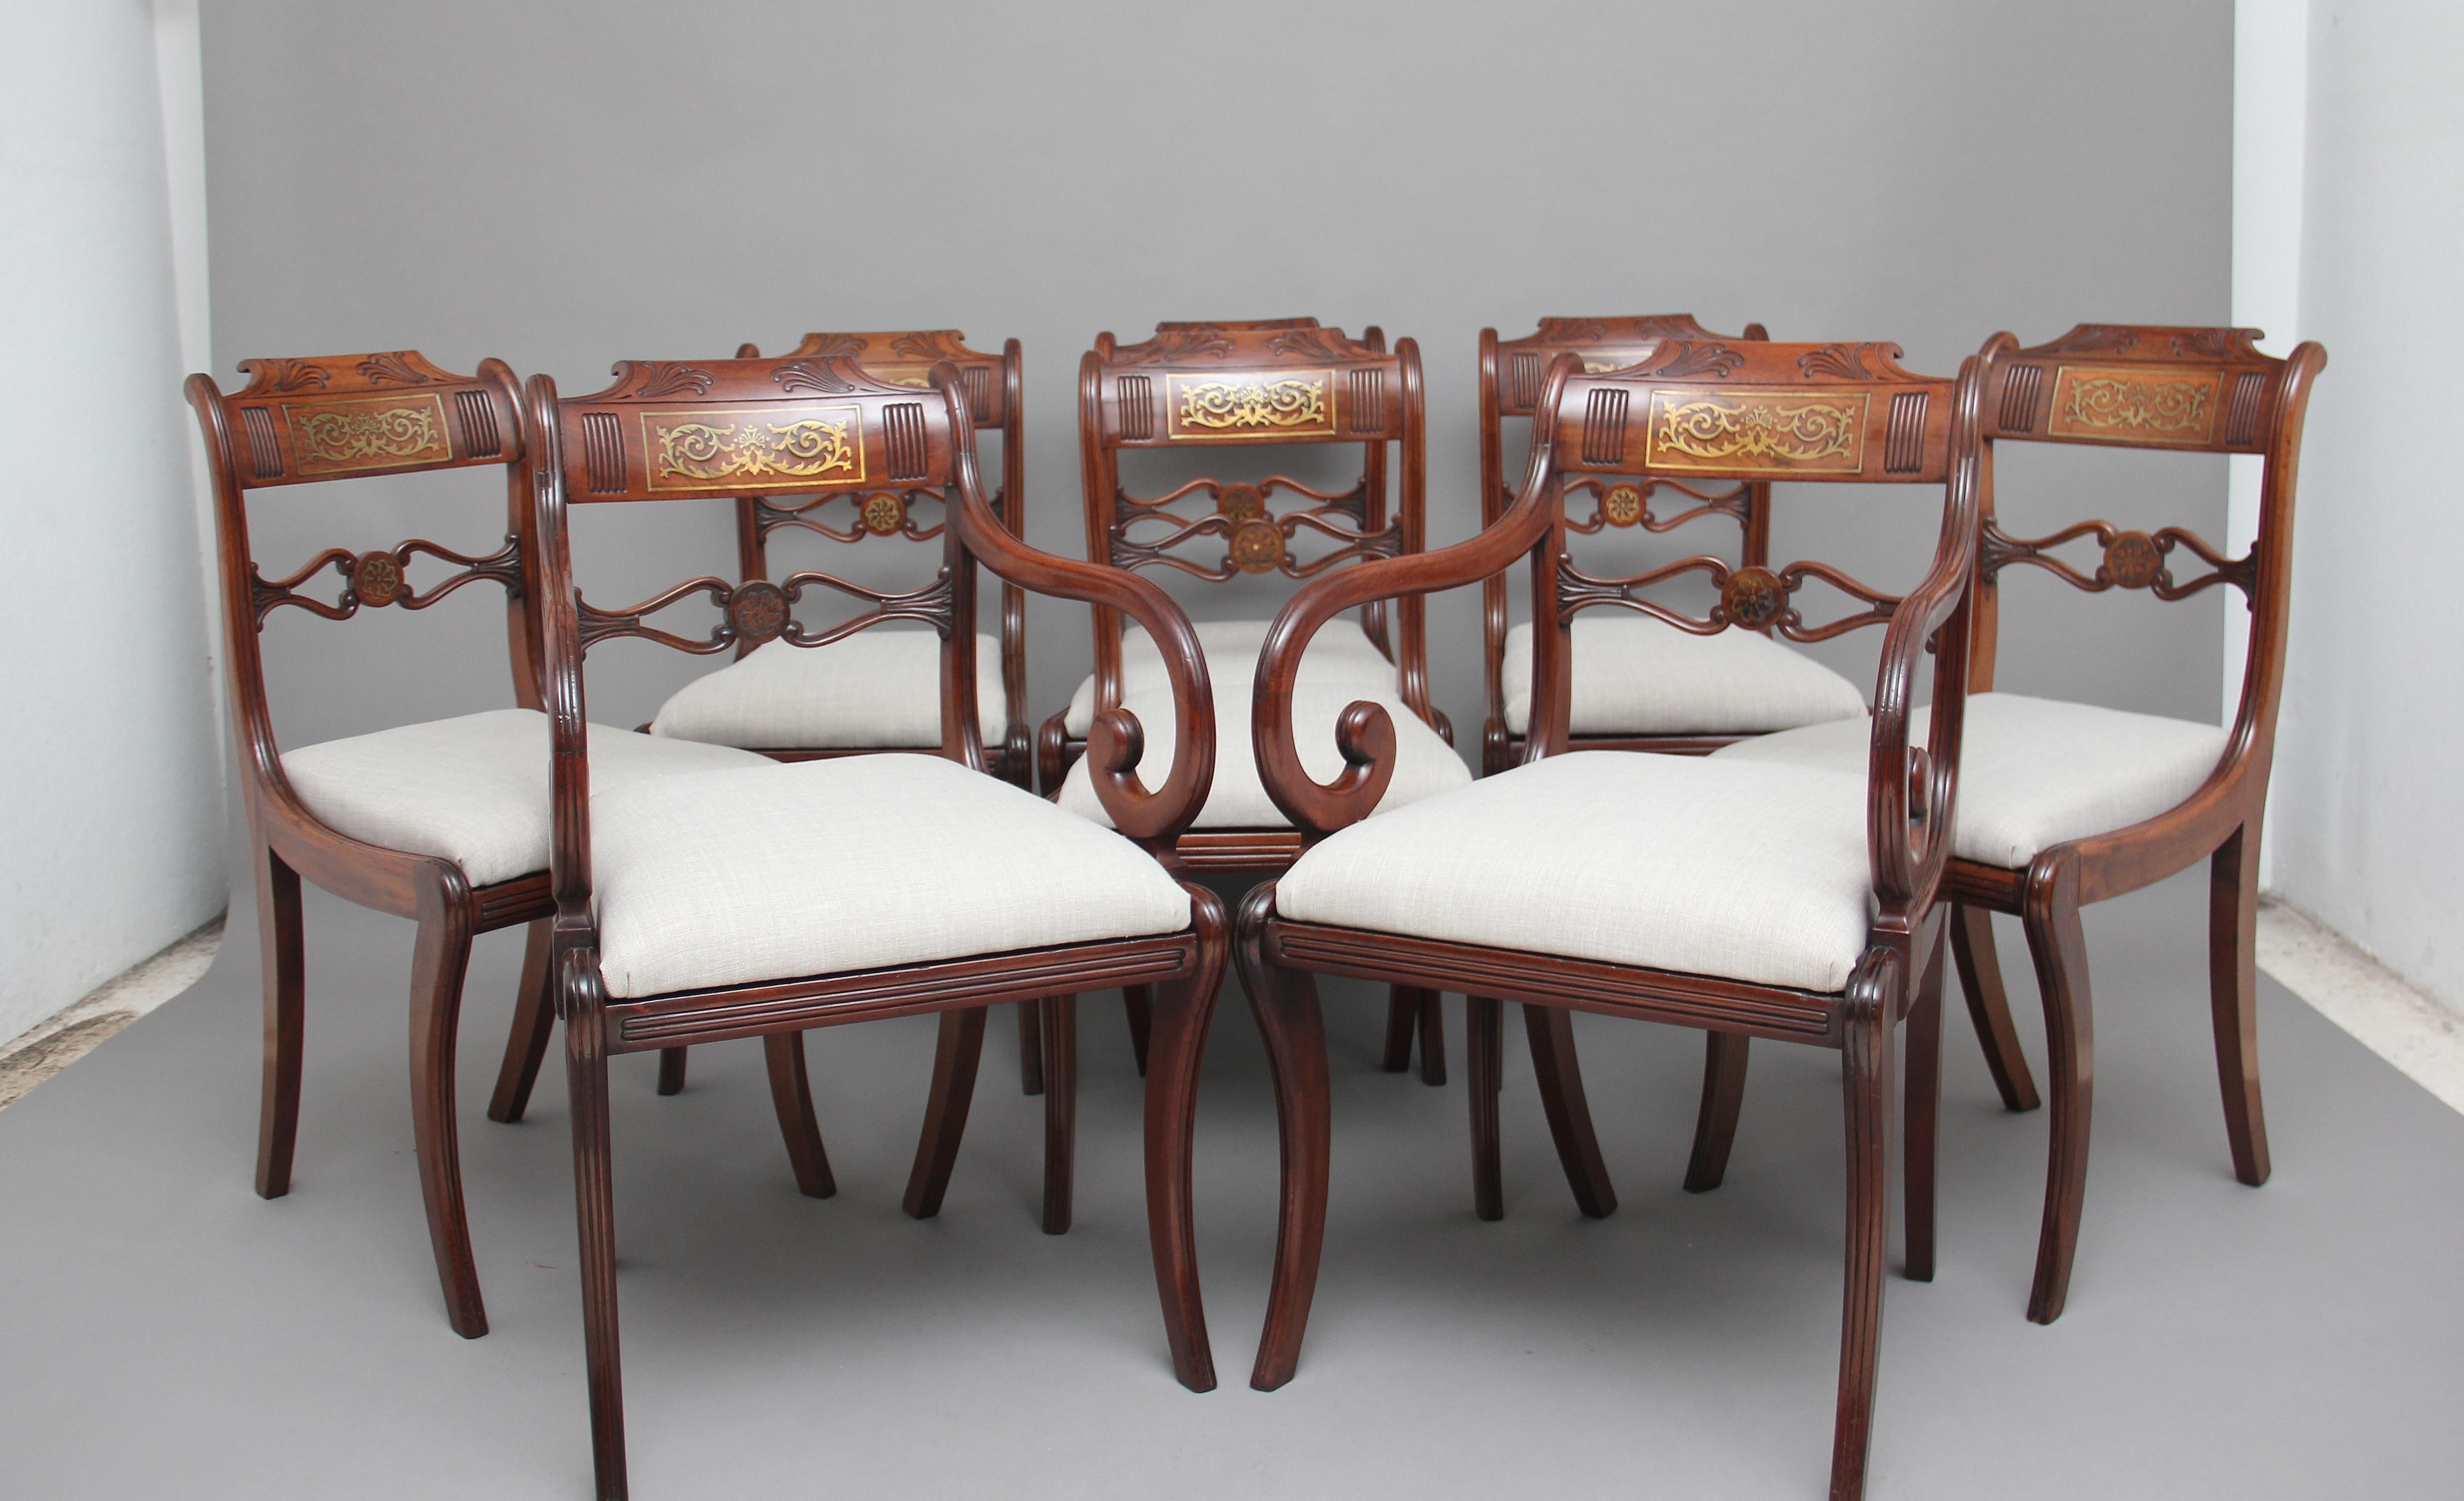 A set of eight Regency mahogany and brass inlaid sabre leg dining chairs, consisting of six side chairs and two armchairs, the shaped top rail carved and having a brass inlaid panel, wonderfully shaped and carved central rail, the armchairs having